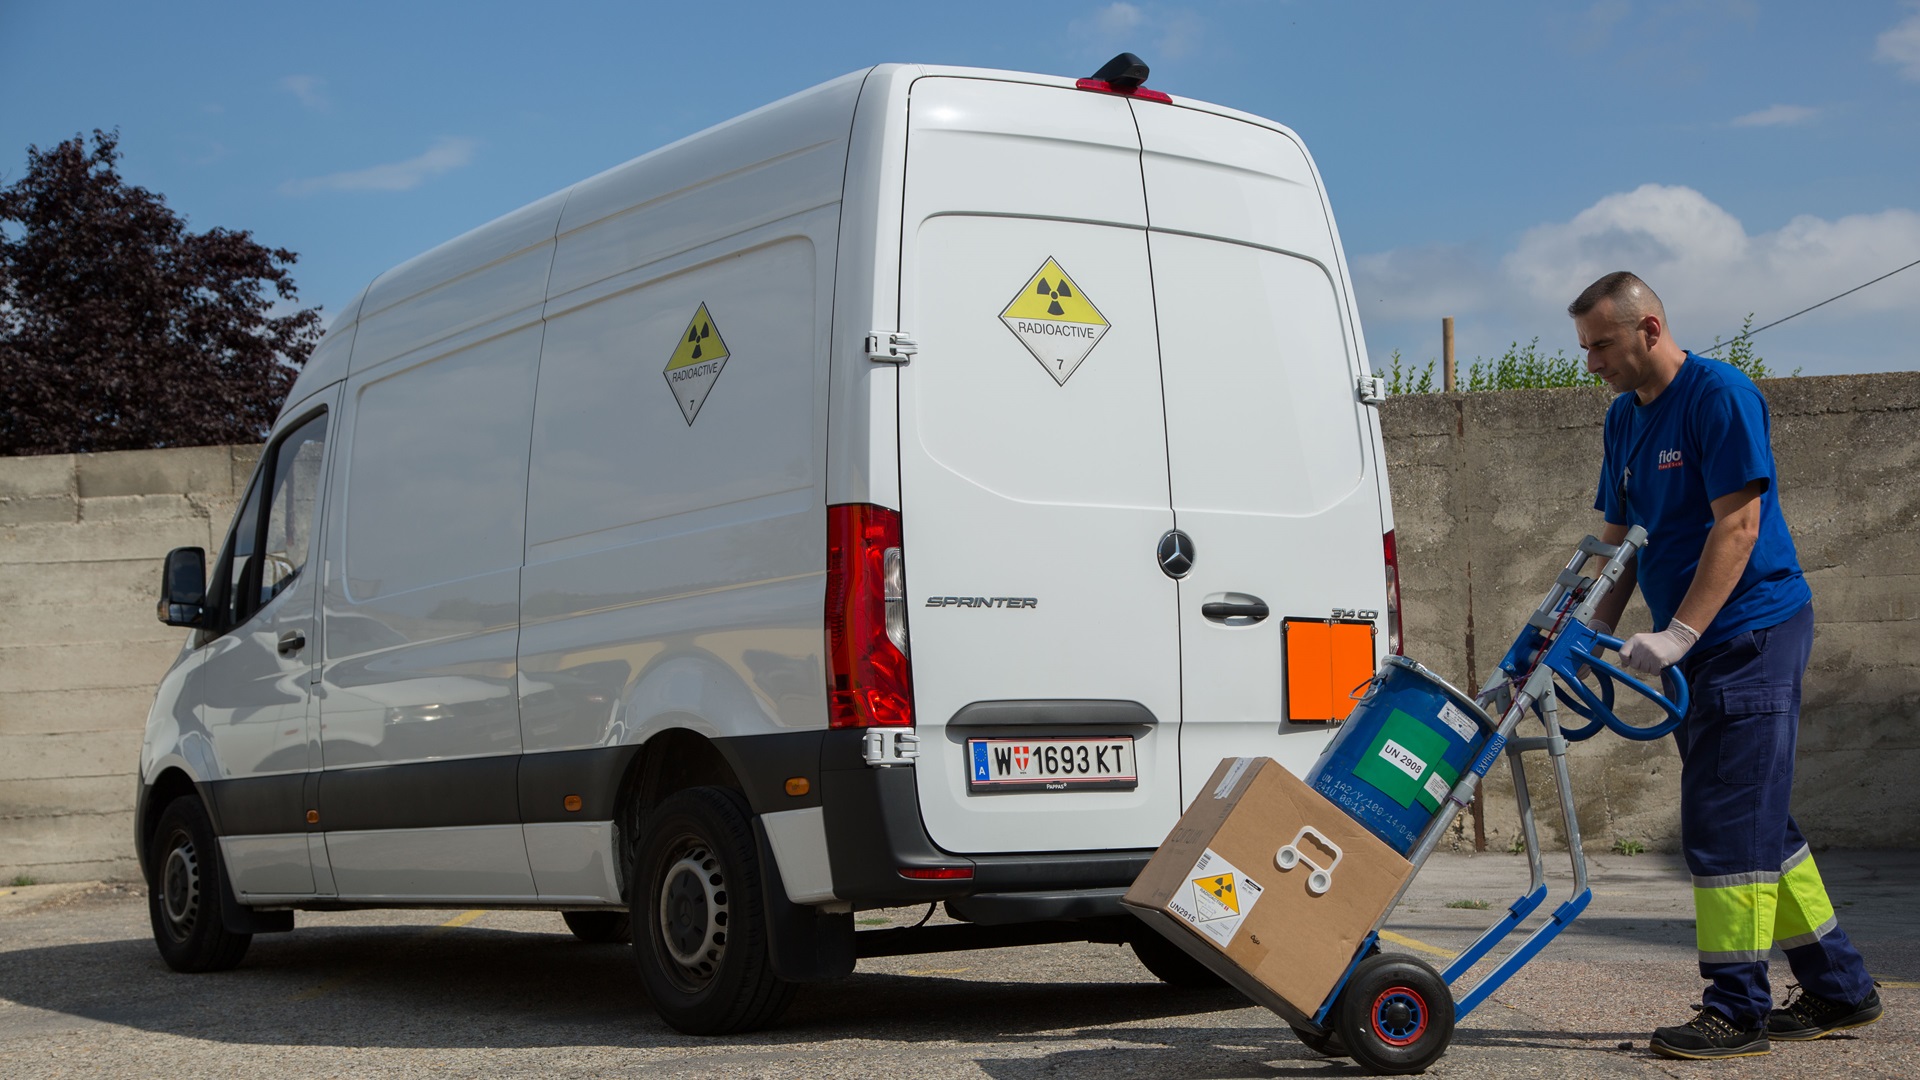 A worker in a blue uniform is using a hand truck to transport a cardboard box with hazardous material labels next to a white Sprinter van marked with radioactive warning signs.